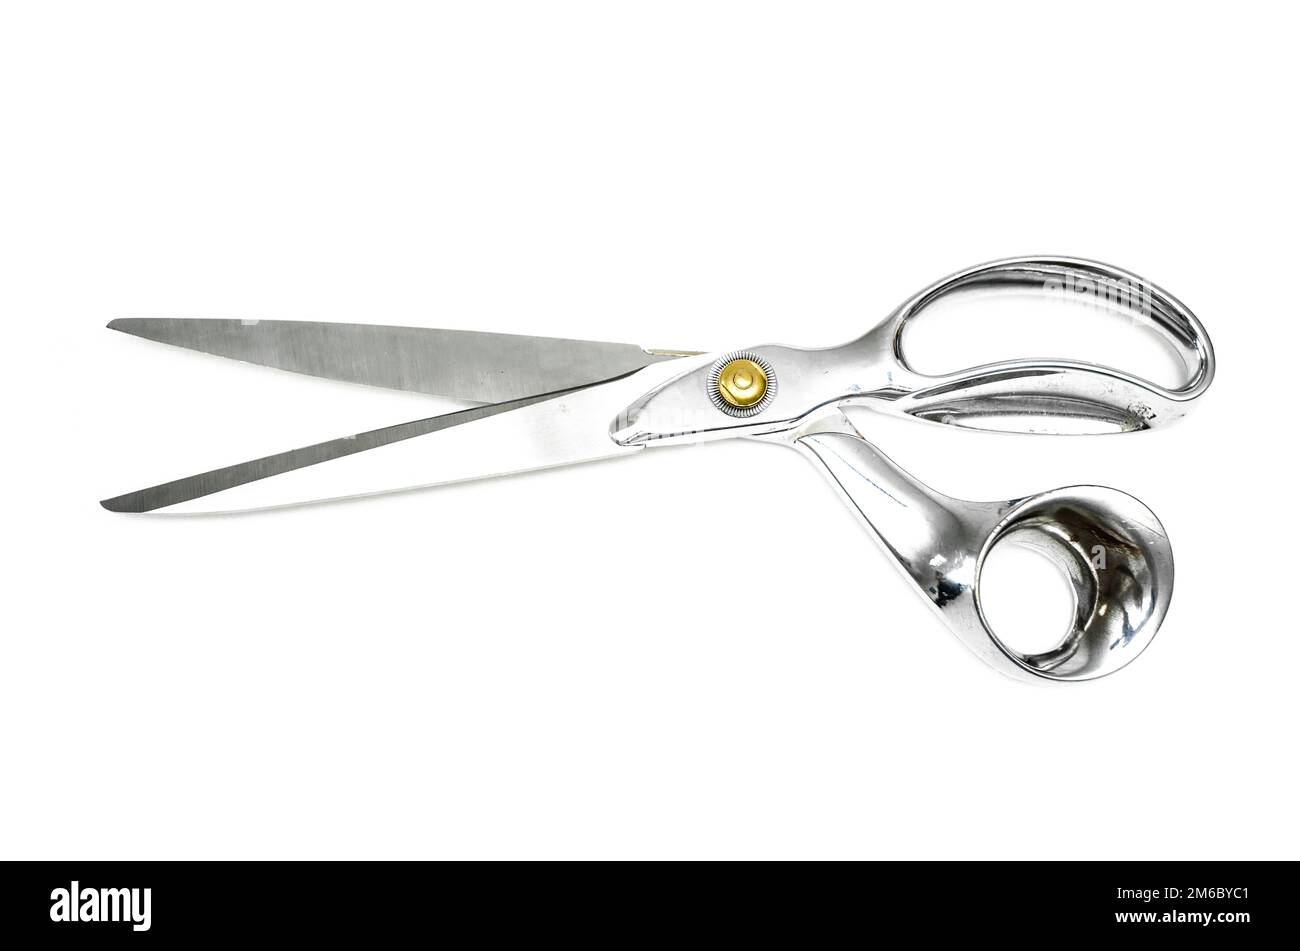 https://c8.alamy.com/comp/2M6BYC1/pair-of-tailor-scissors-with-metal-golden-handle-isolated-on-white-background-2M6BYC1.jpg